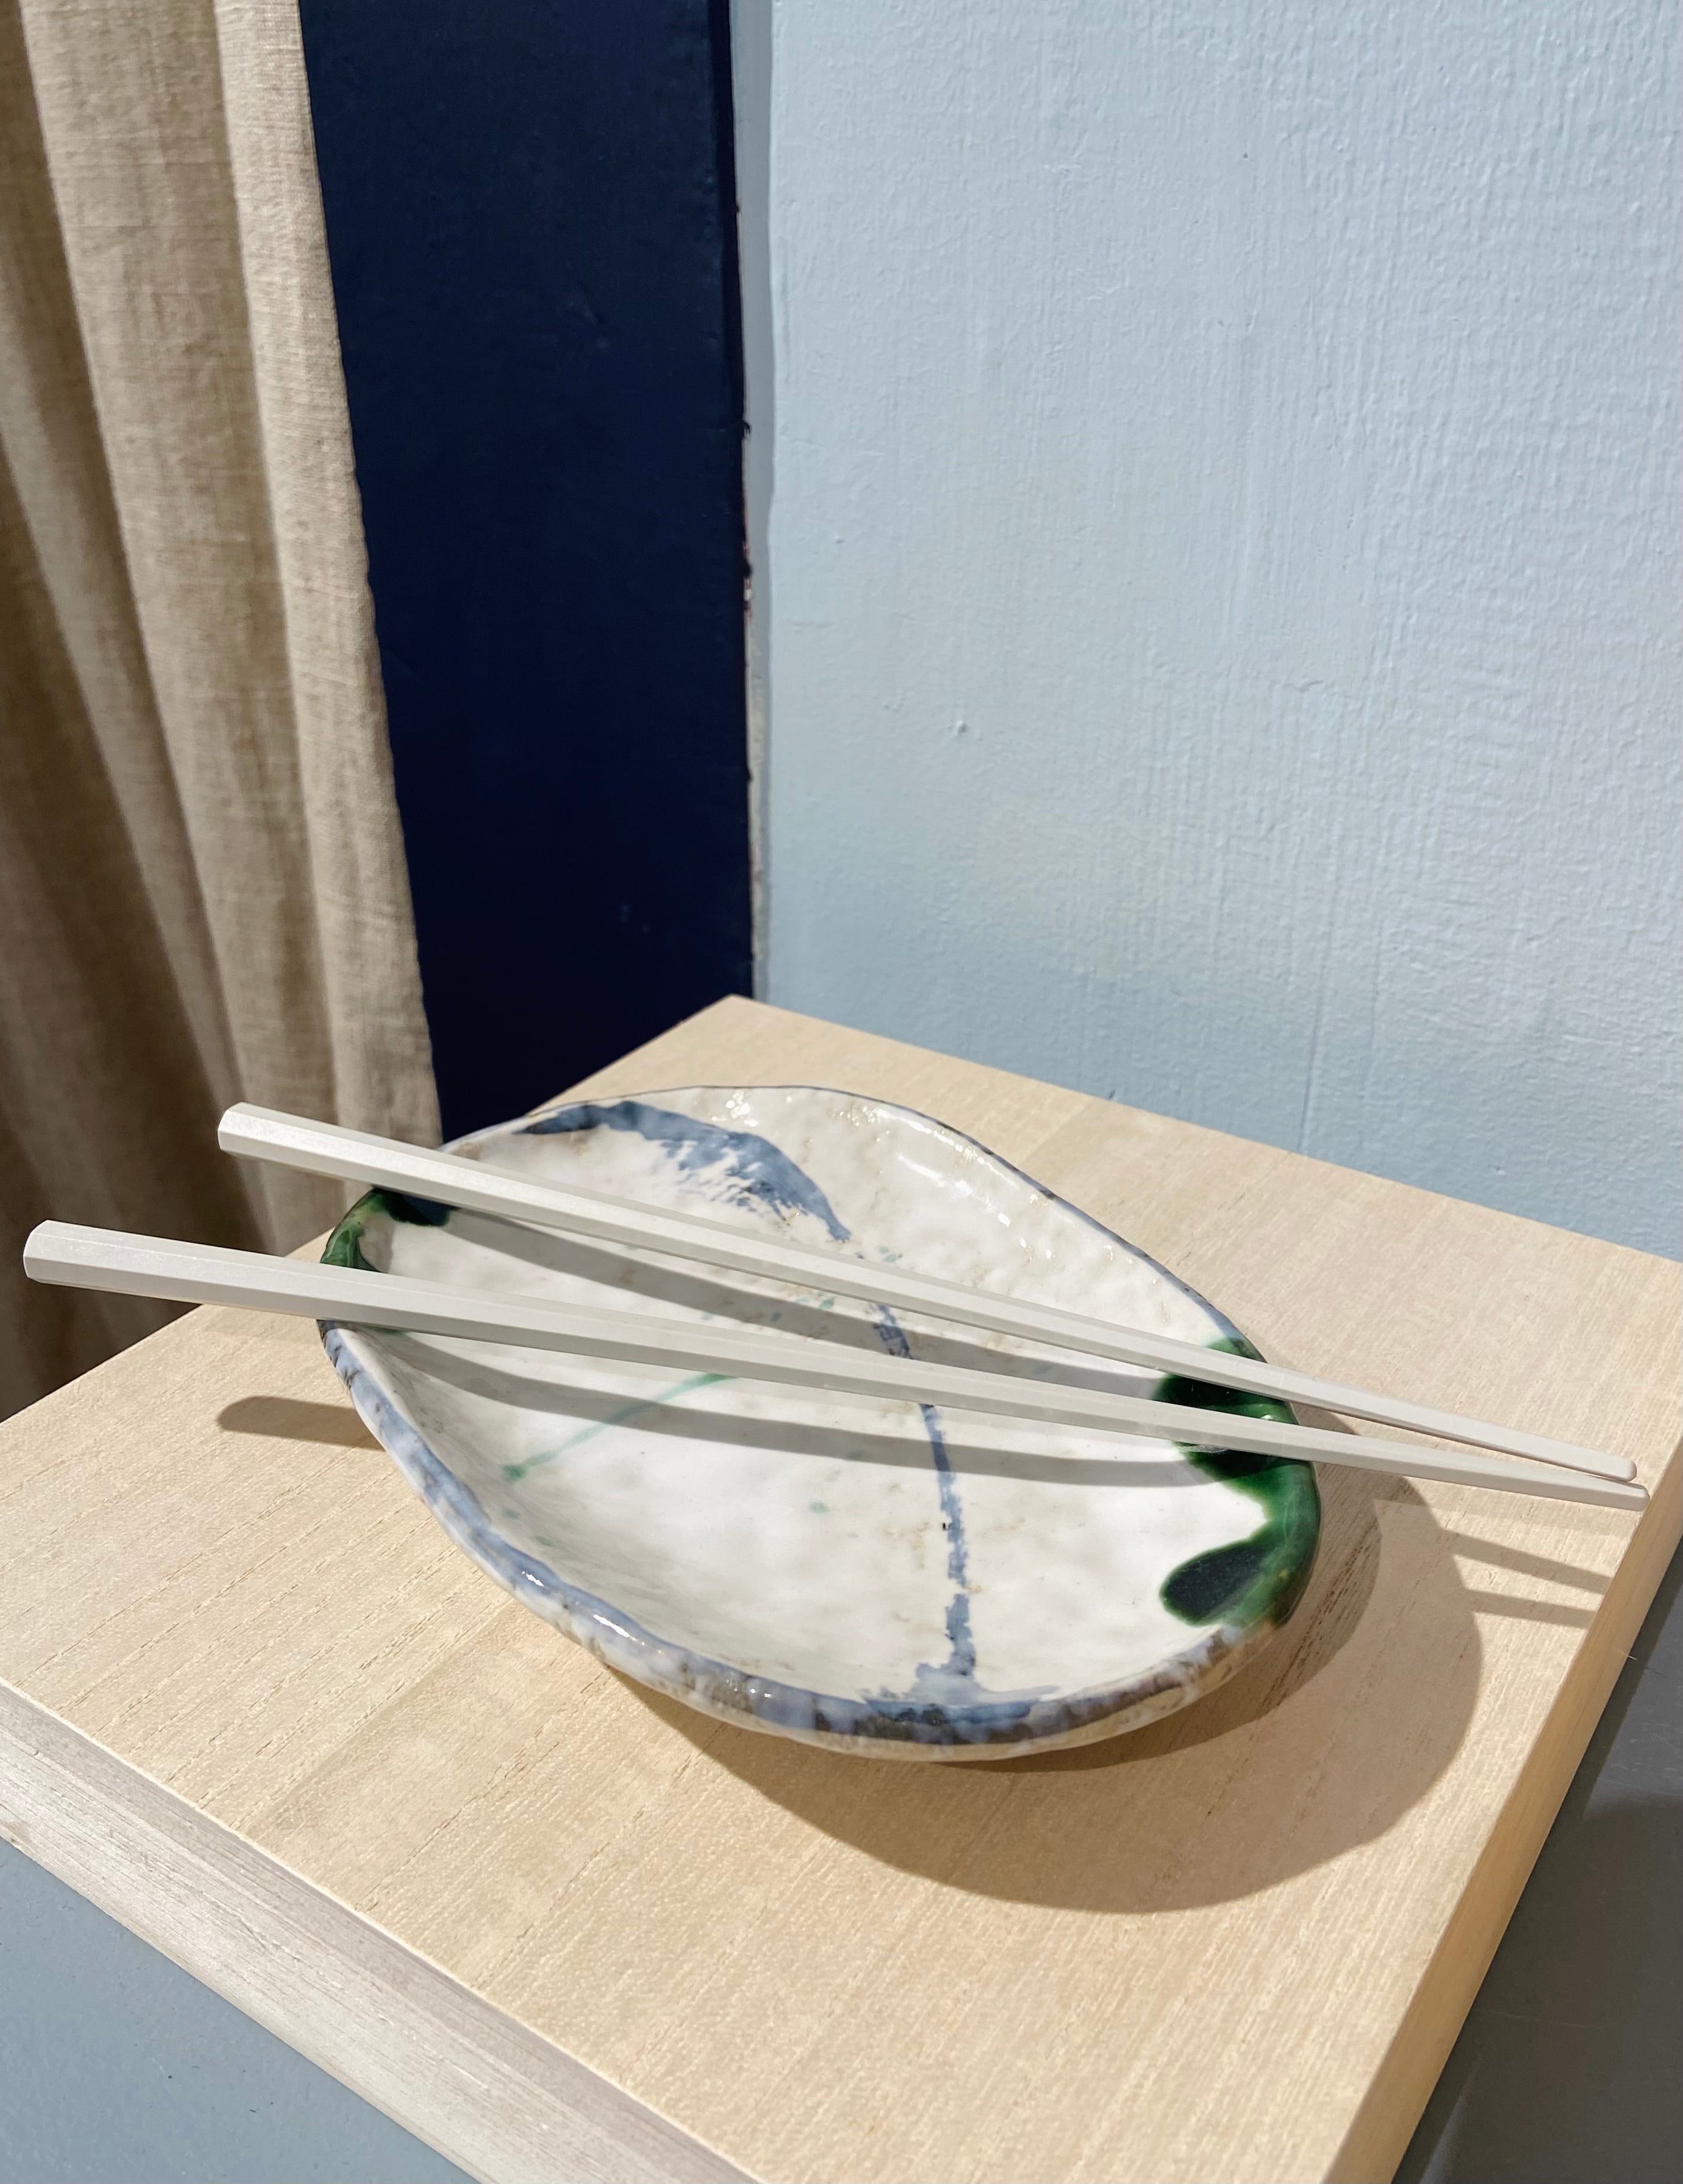 Japanese dish with blue and green pattern, small